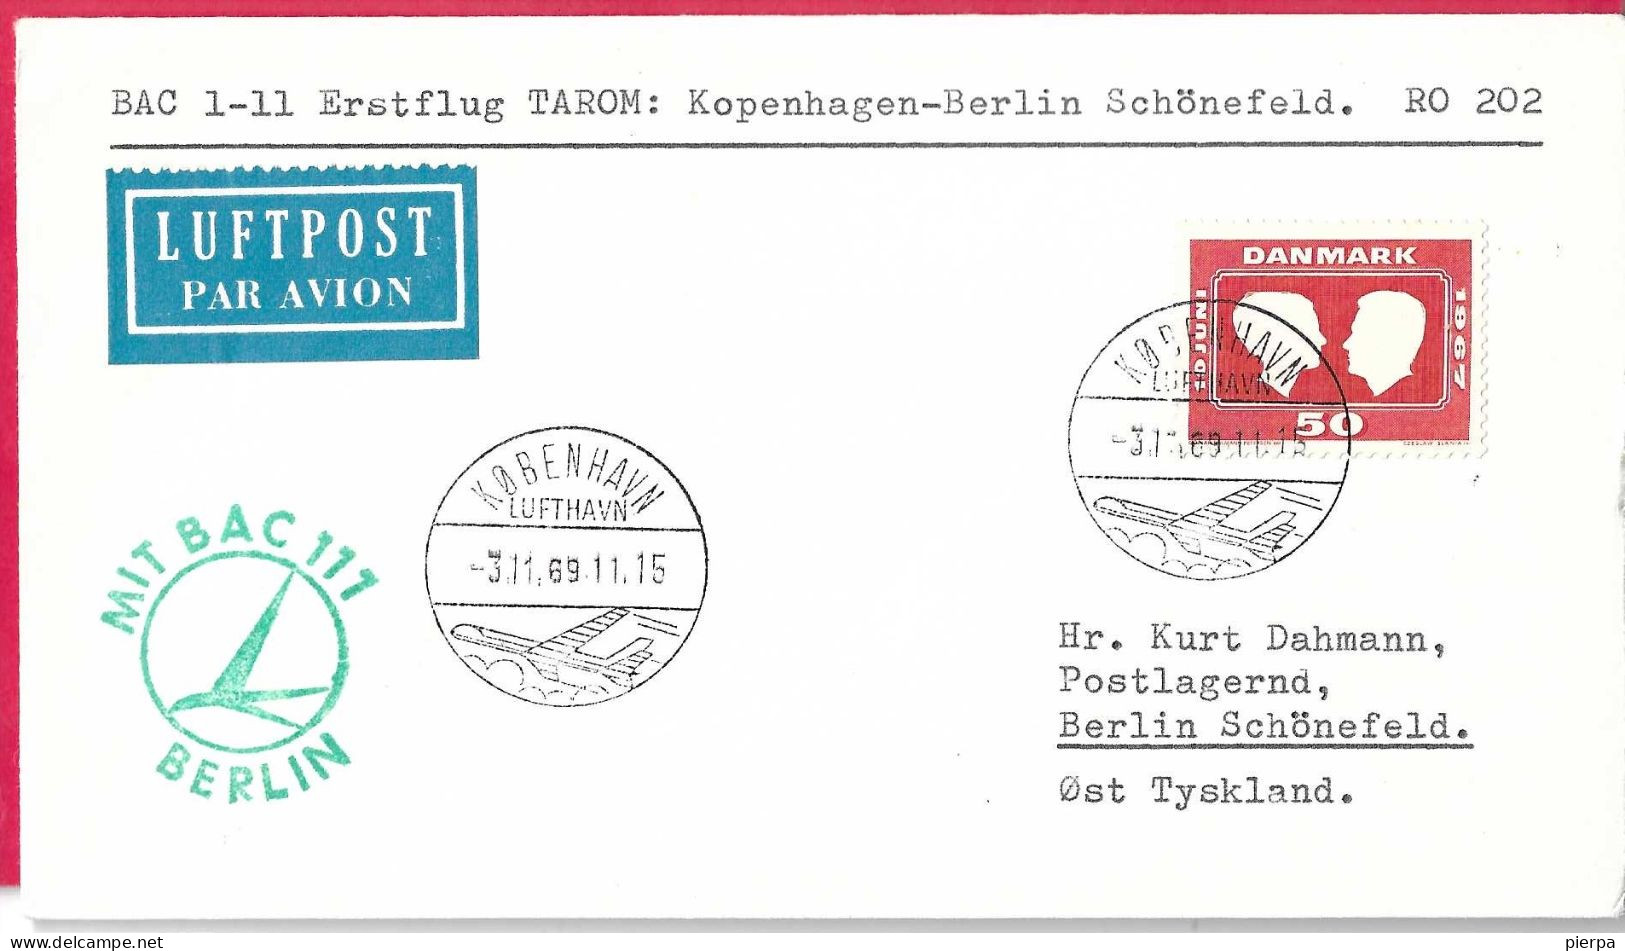 DANMARK - FIRST FLIGHT TAROM WITH BAC 117 FROM KOBENHAVN TO BERLIN/SCHONEFELD *3.11.69* ON OFFICIAL COVER - Luftpost